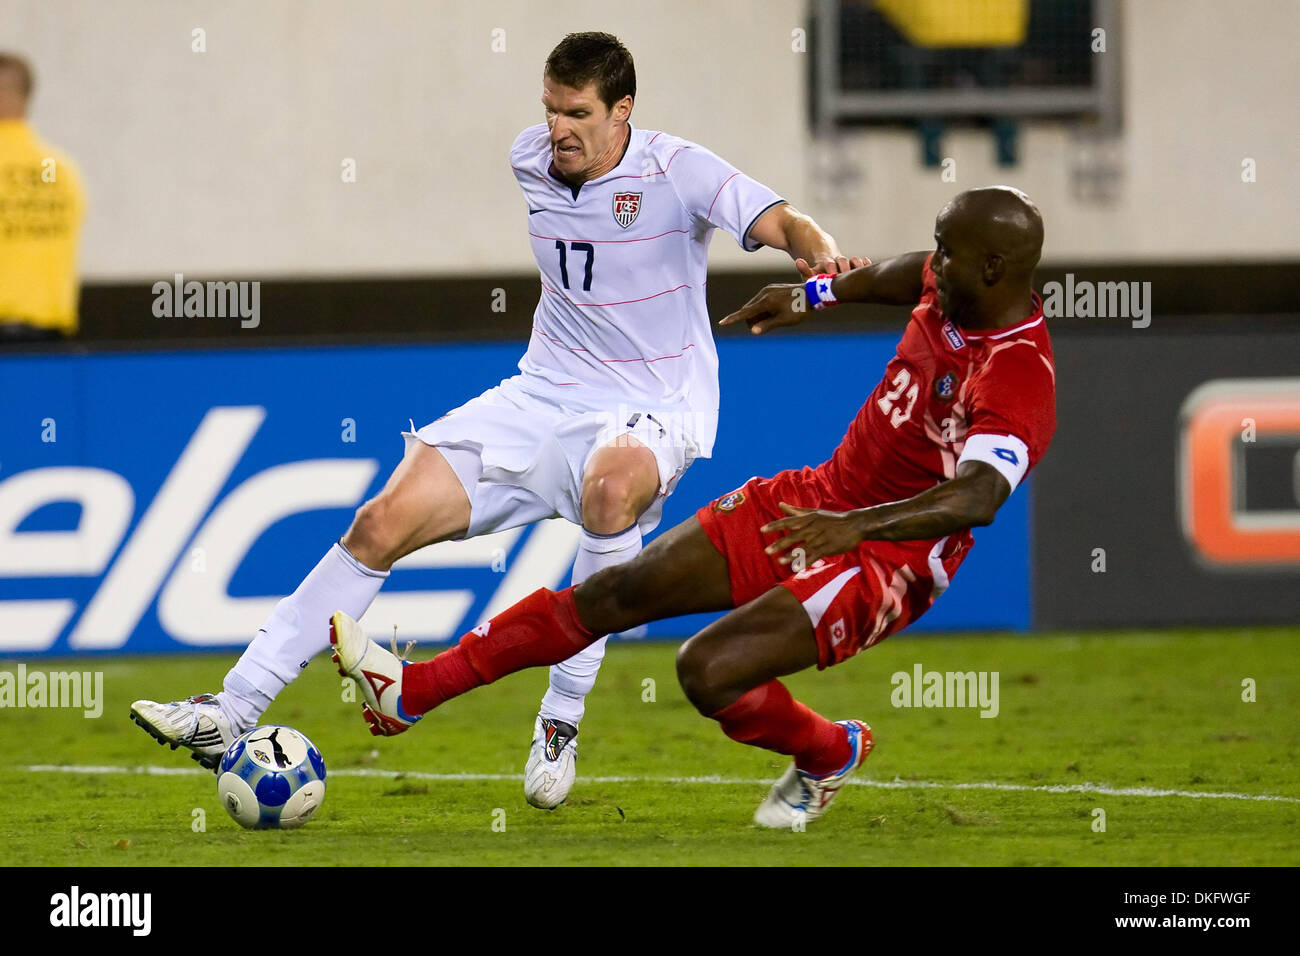 Jul 18, 2009 - Philadelphia, Pennsylvania, USA - United States' attacker KENNY COOPER (17) trying to keep the ball from the sliding Panama's defender FELIPE BALOY (23) during the CONCACAF Gold Cup quarter finals match between United States and Panama at Lincoln Financial Field in Philadelphia, Pennsylvania.  United States beat Panama, 2-1 in overtime. (Credit Image: © Christopher S Stock Photo